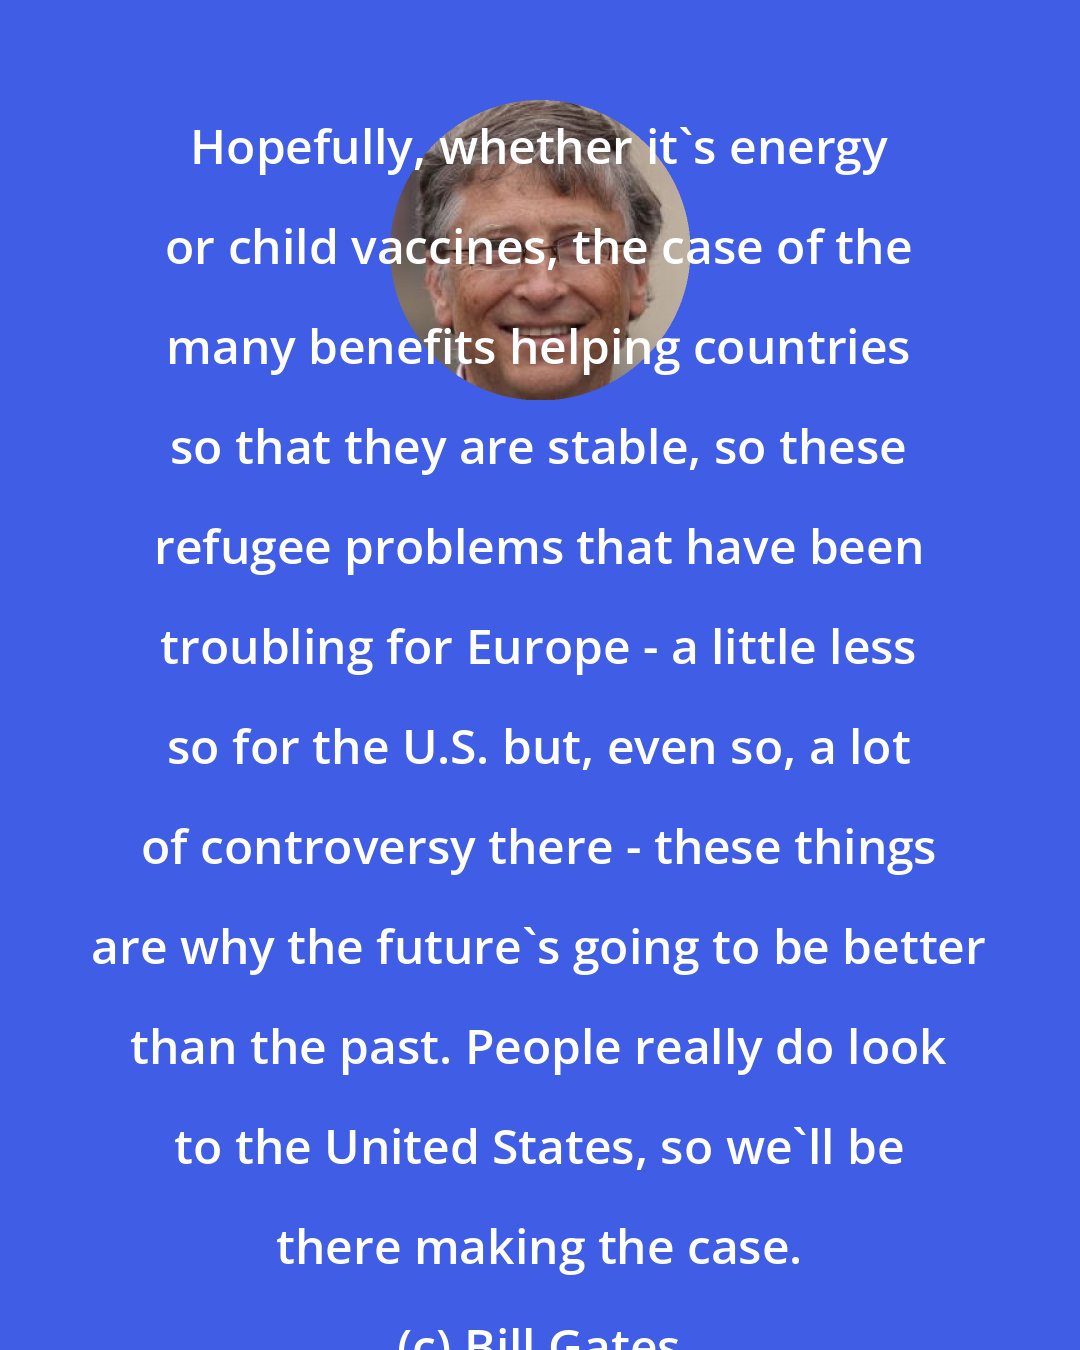 Bill Gates: Hopefully, whether it's energy or child vaccines, the case of the many benefits helping countries so that they are stable, so these refugee problems that have been troubling for Europe - a little less so for the U.S. but, even so, a lot of controversy there - these things are why the future's going to be better than the past. People really do look to the United States, so we'll be there making the case.